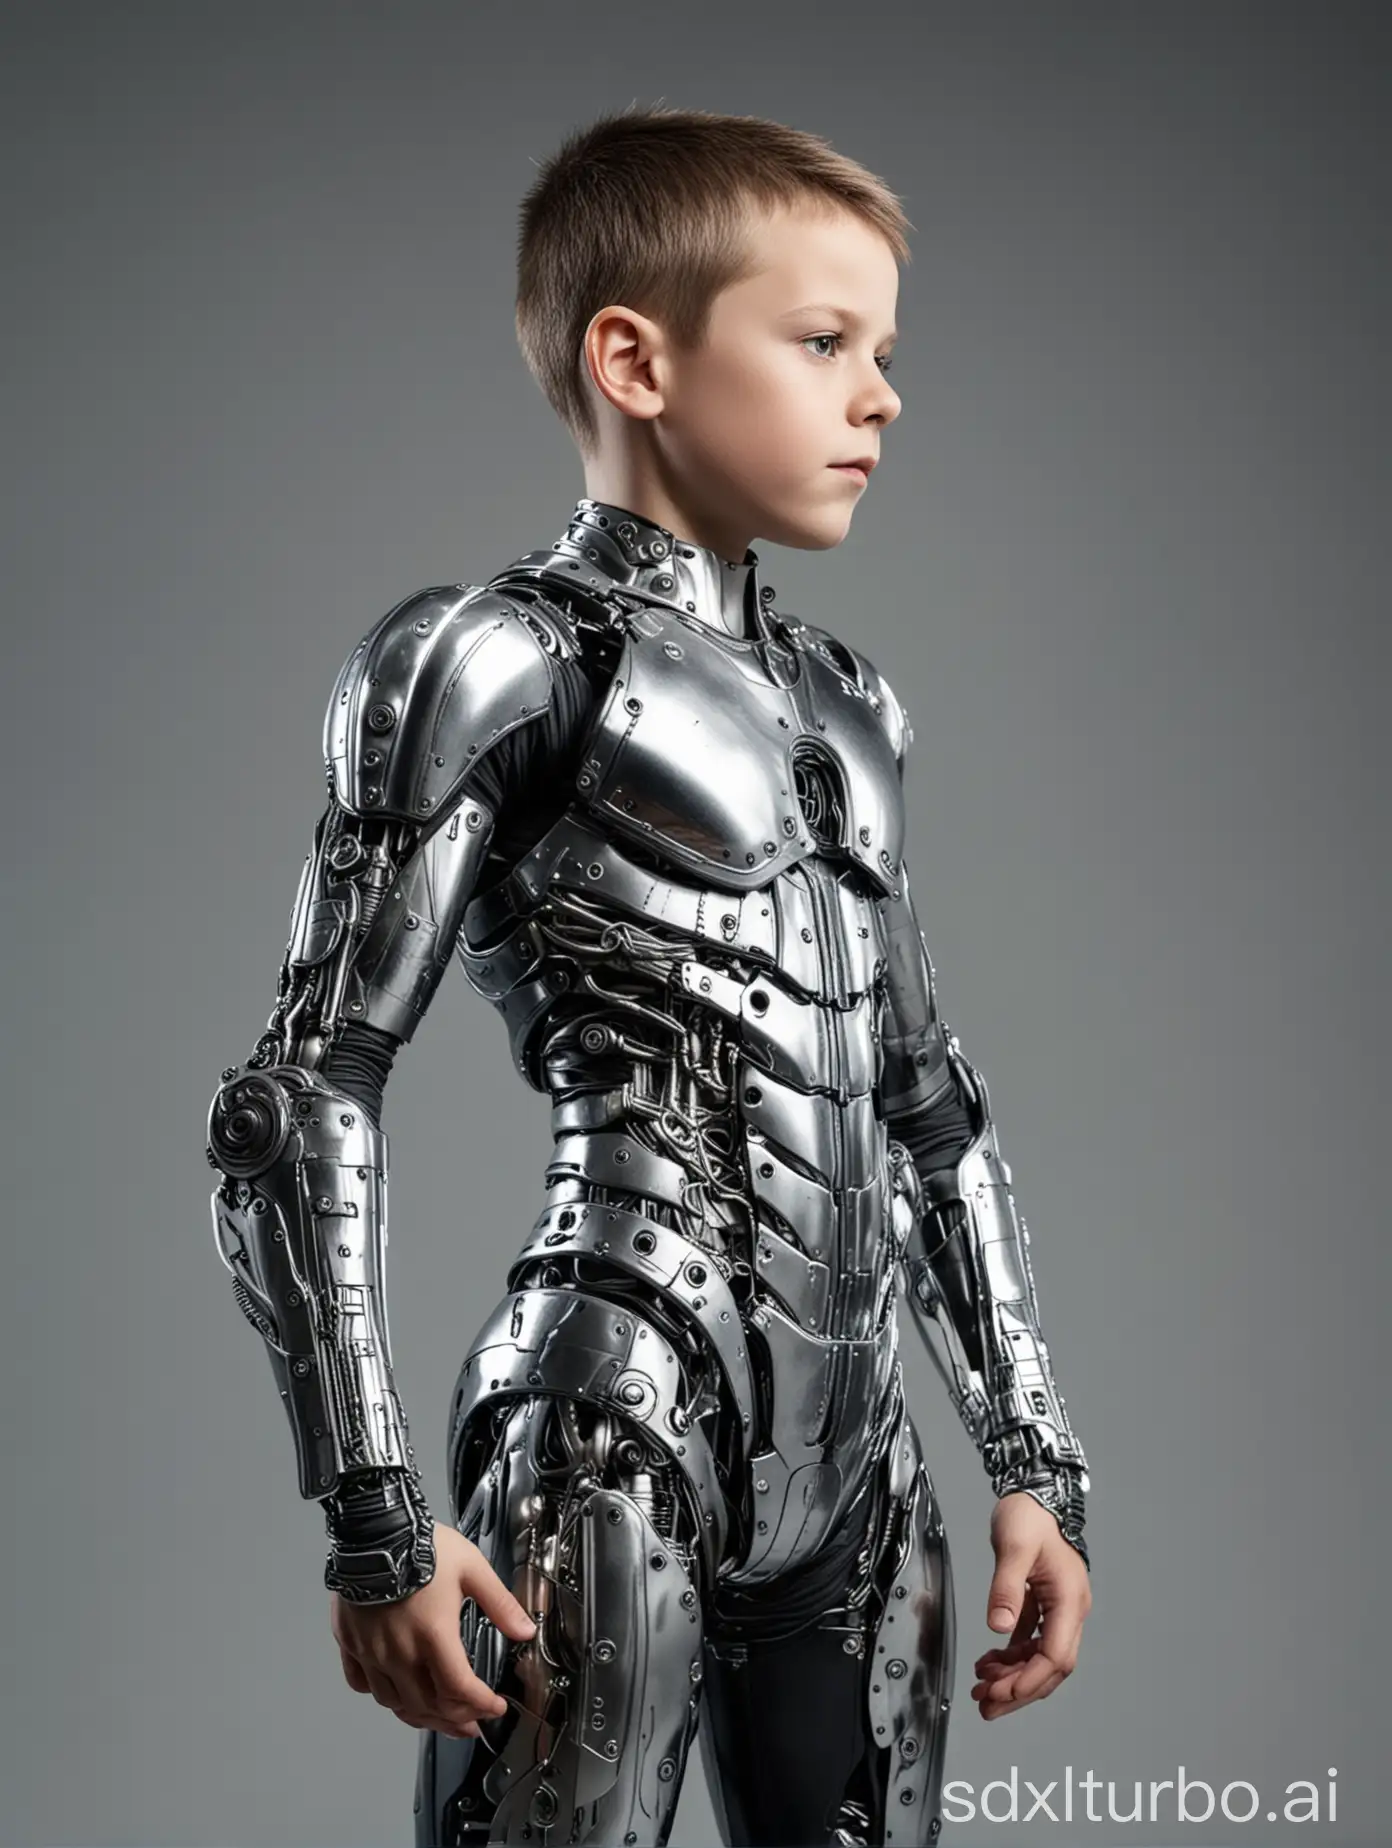 15 year young athletic muscular boy in bionic metal suit, standing sideways